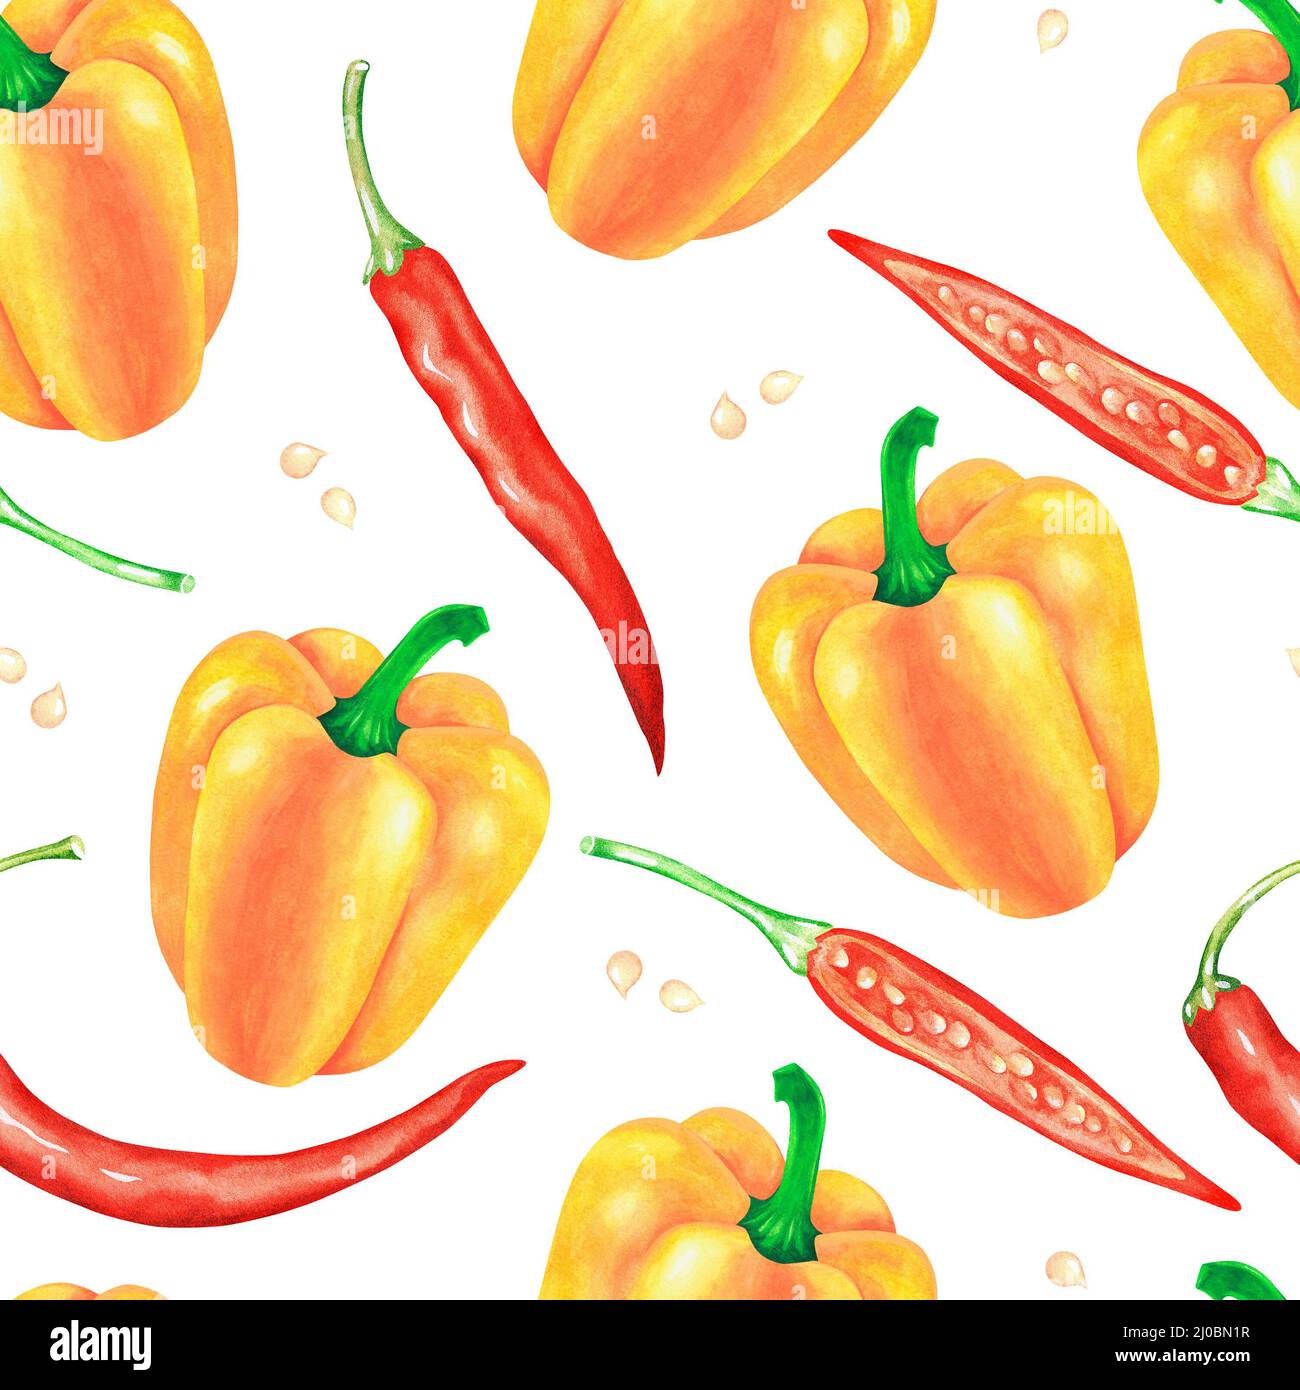 Sweet yellow and red hot pepper. Watercolor illustration. Isolated on a white background. For your design cookbooks, recipes, aprons. Stock Photo